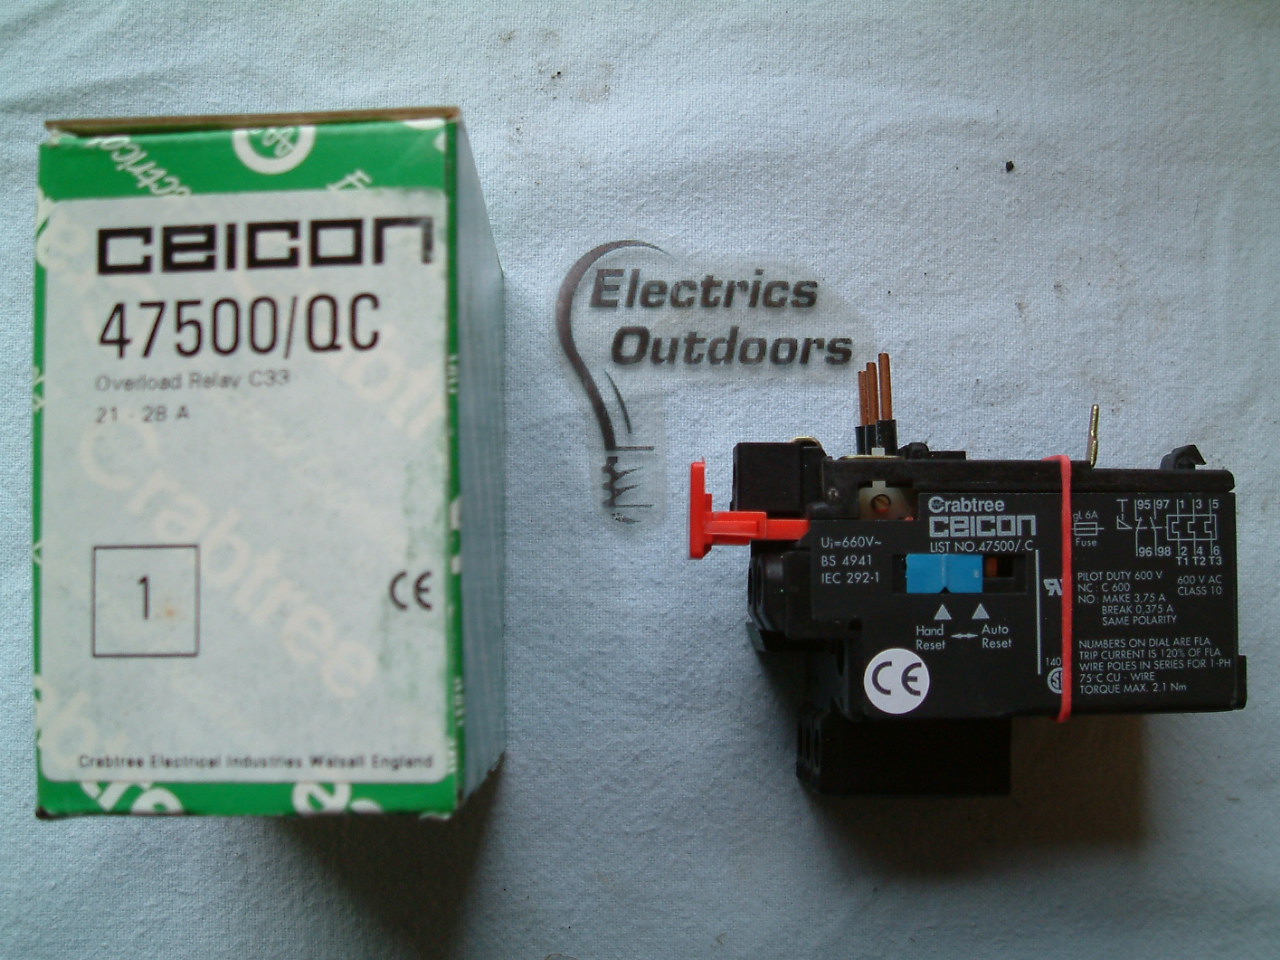 CRABTREE CEICON OVERLOAD RELAY C 33 21 - 28 A 47500/QC